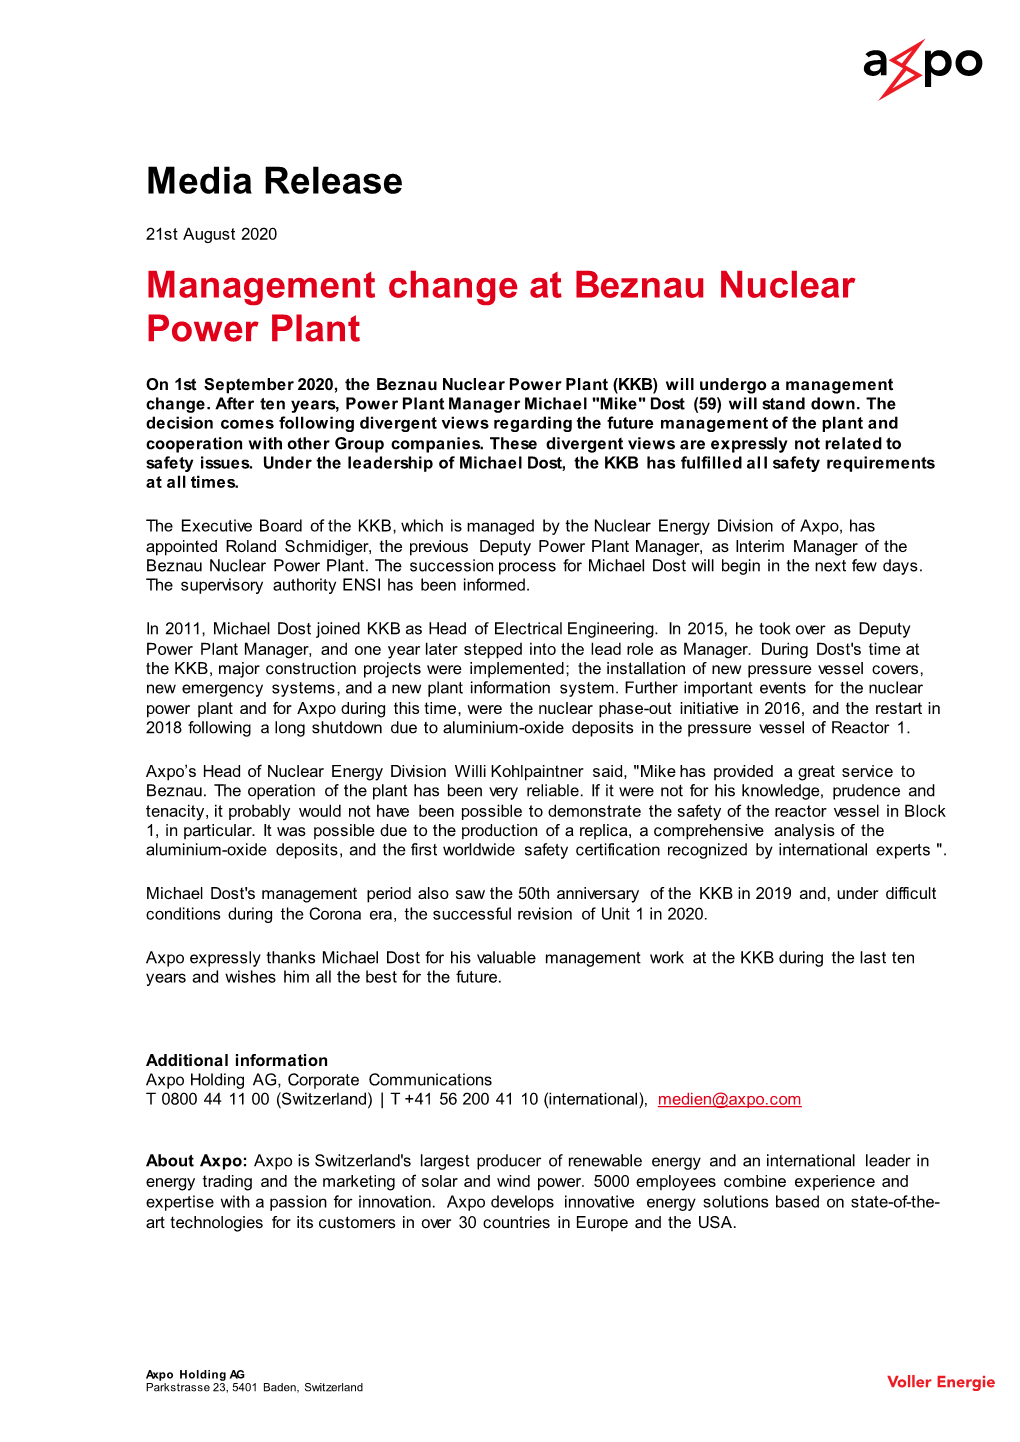 Media Release Management Change at Beznau Nuclear Power Plant